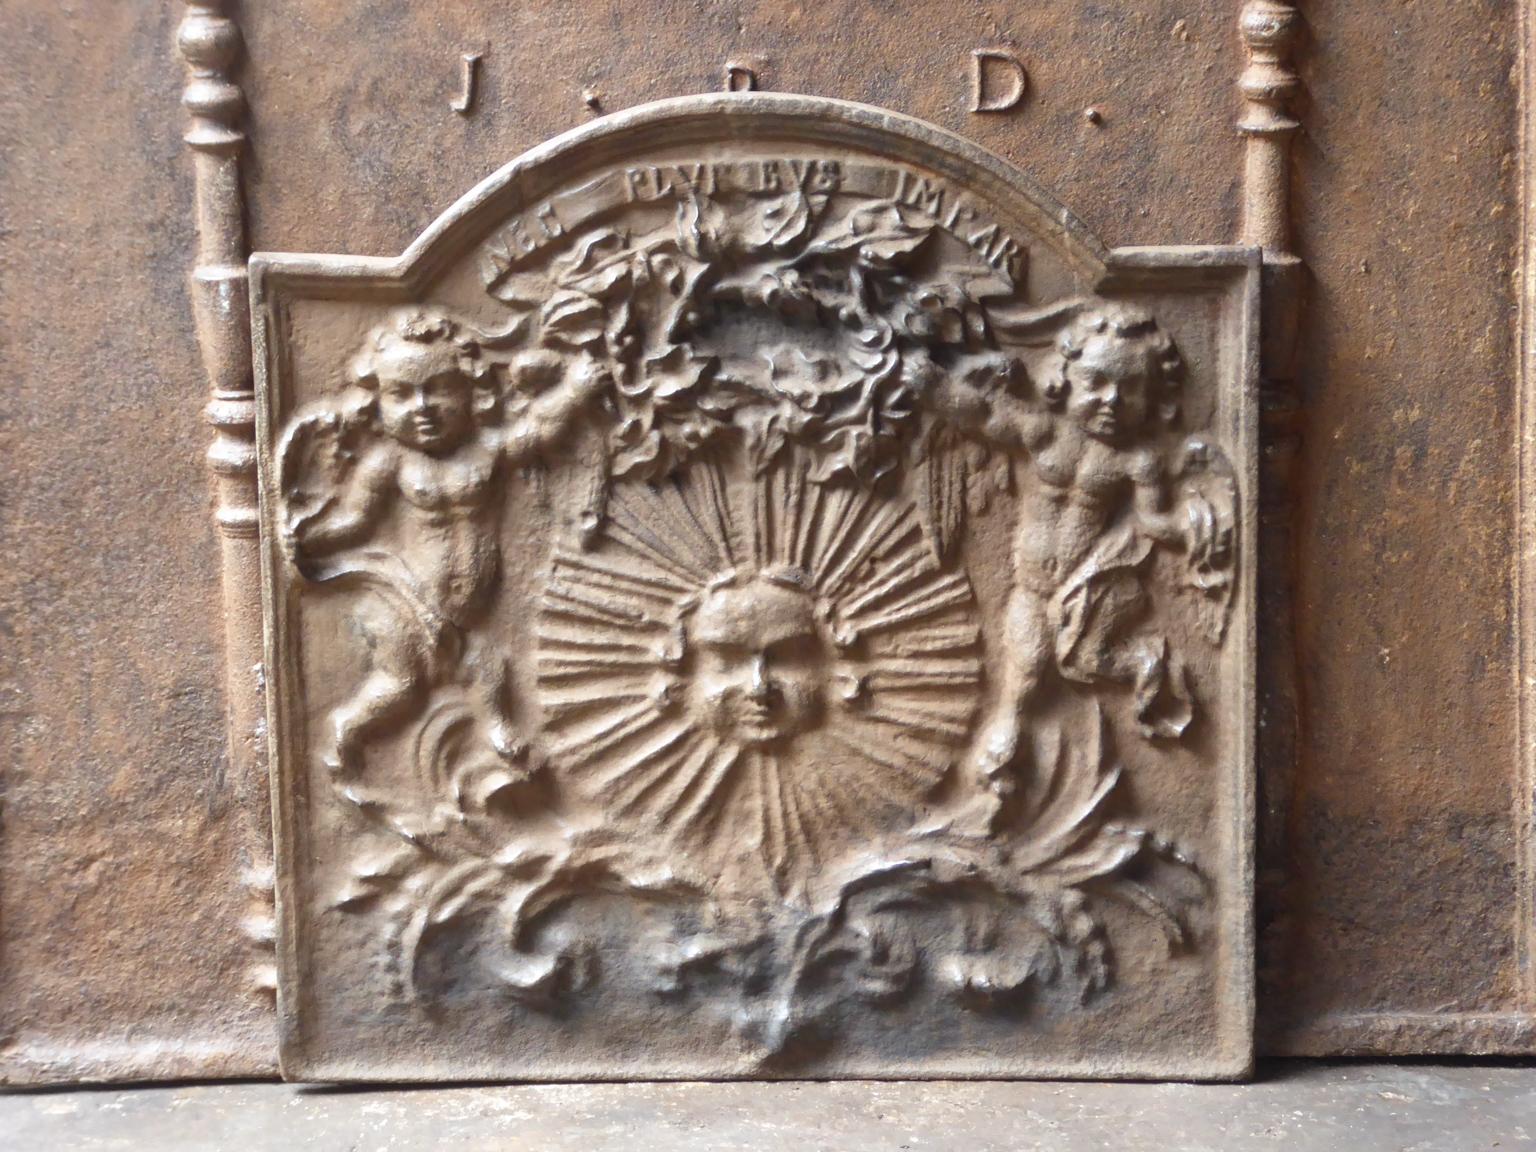 With the sun representing Louis XIV, the Sun King. 20th century Louis XIV style.

The fireback is made of cast iron and has a natural brown patina. Upon request it can be made black / pewter. The fireback is in a good condition and does not have